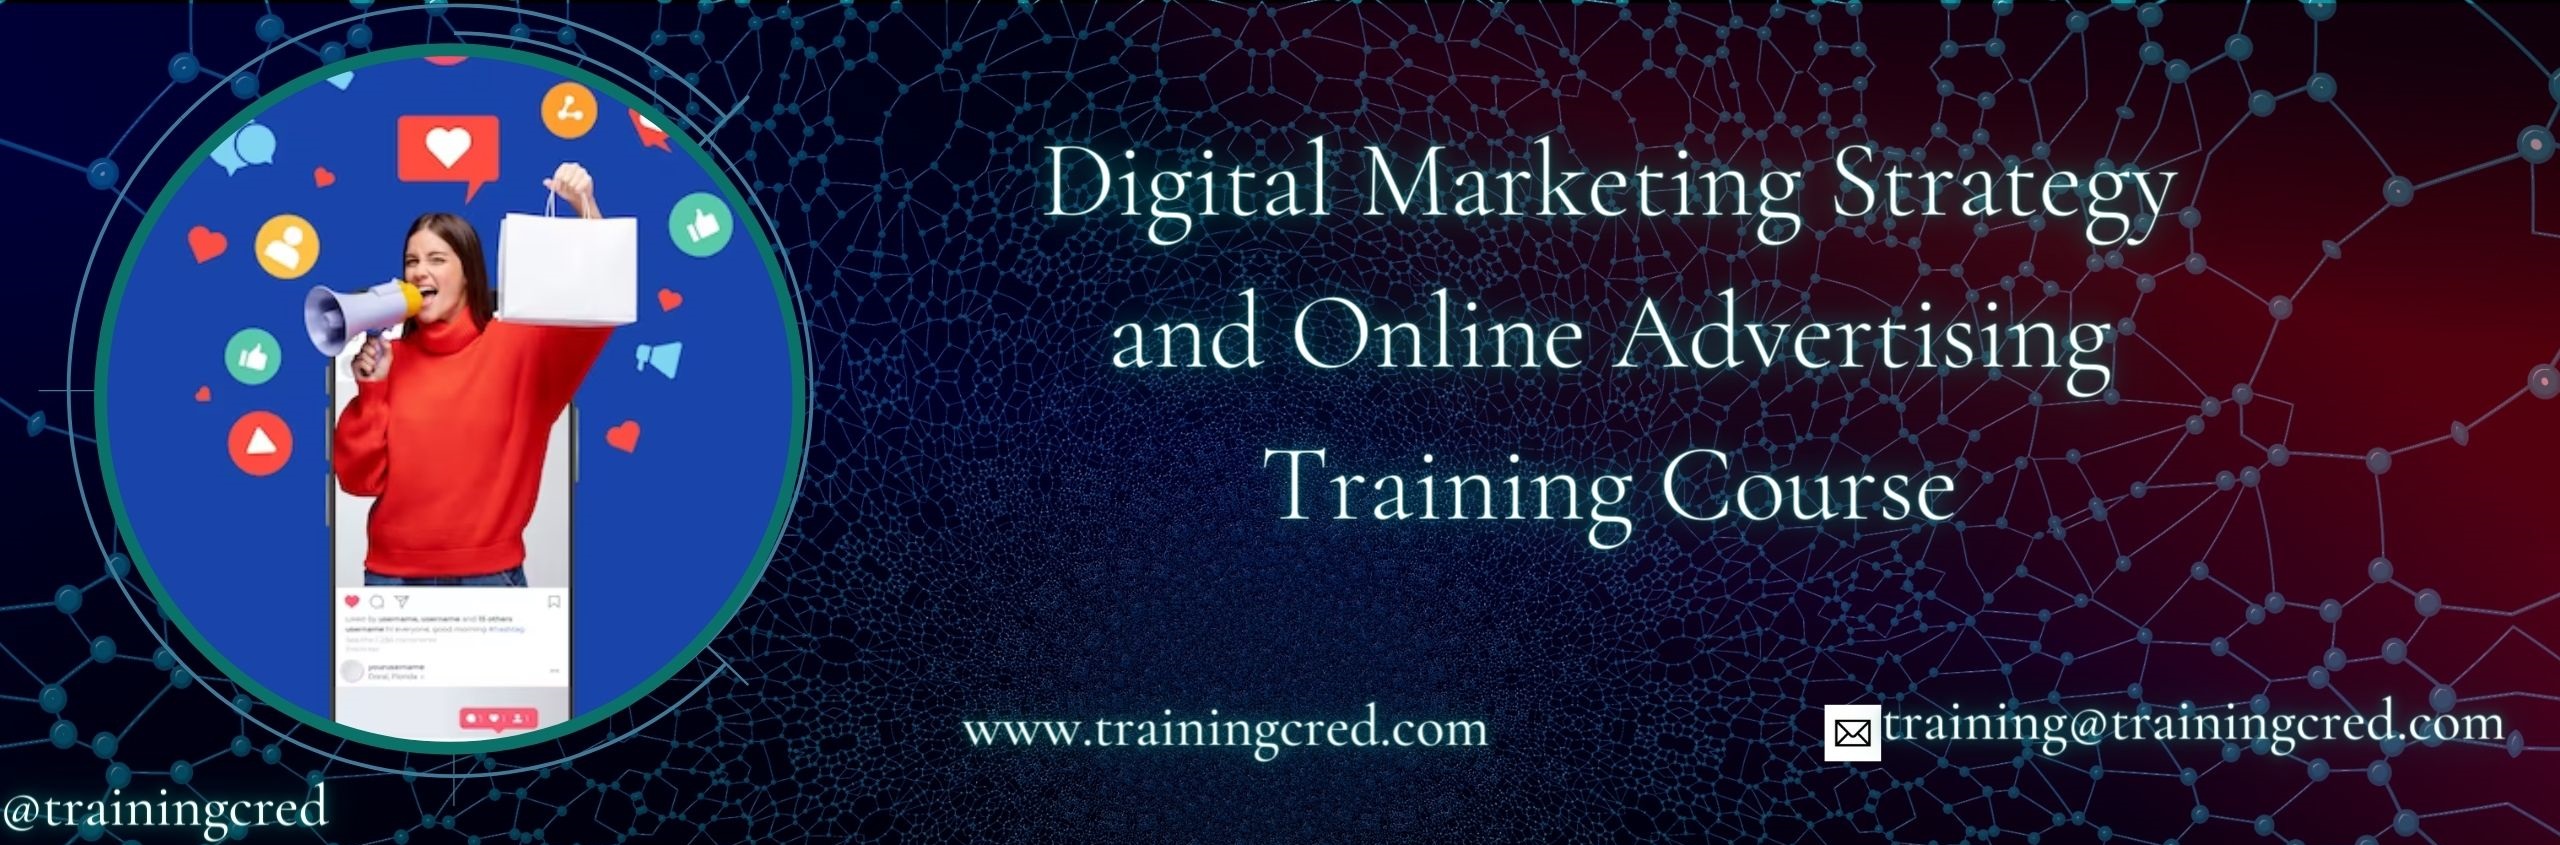 Digital Marketing Strategy and Online Advertising Training